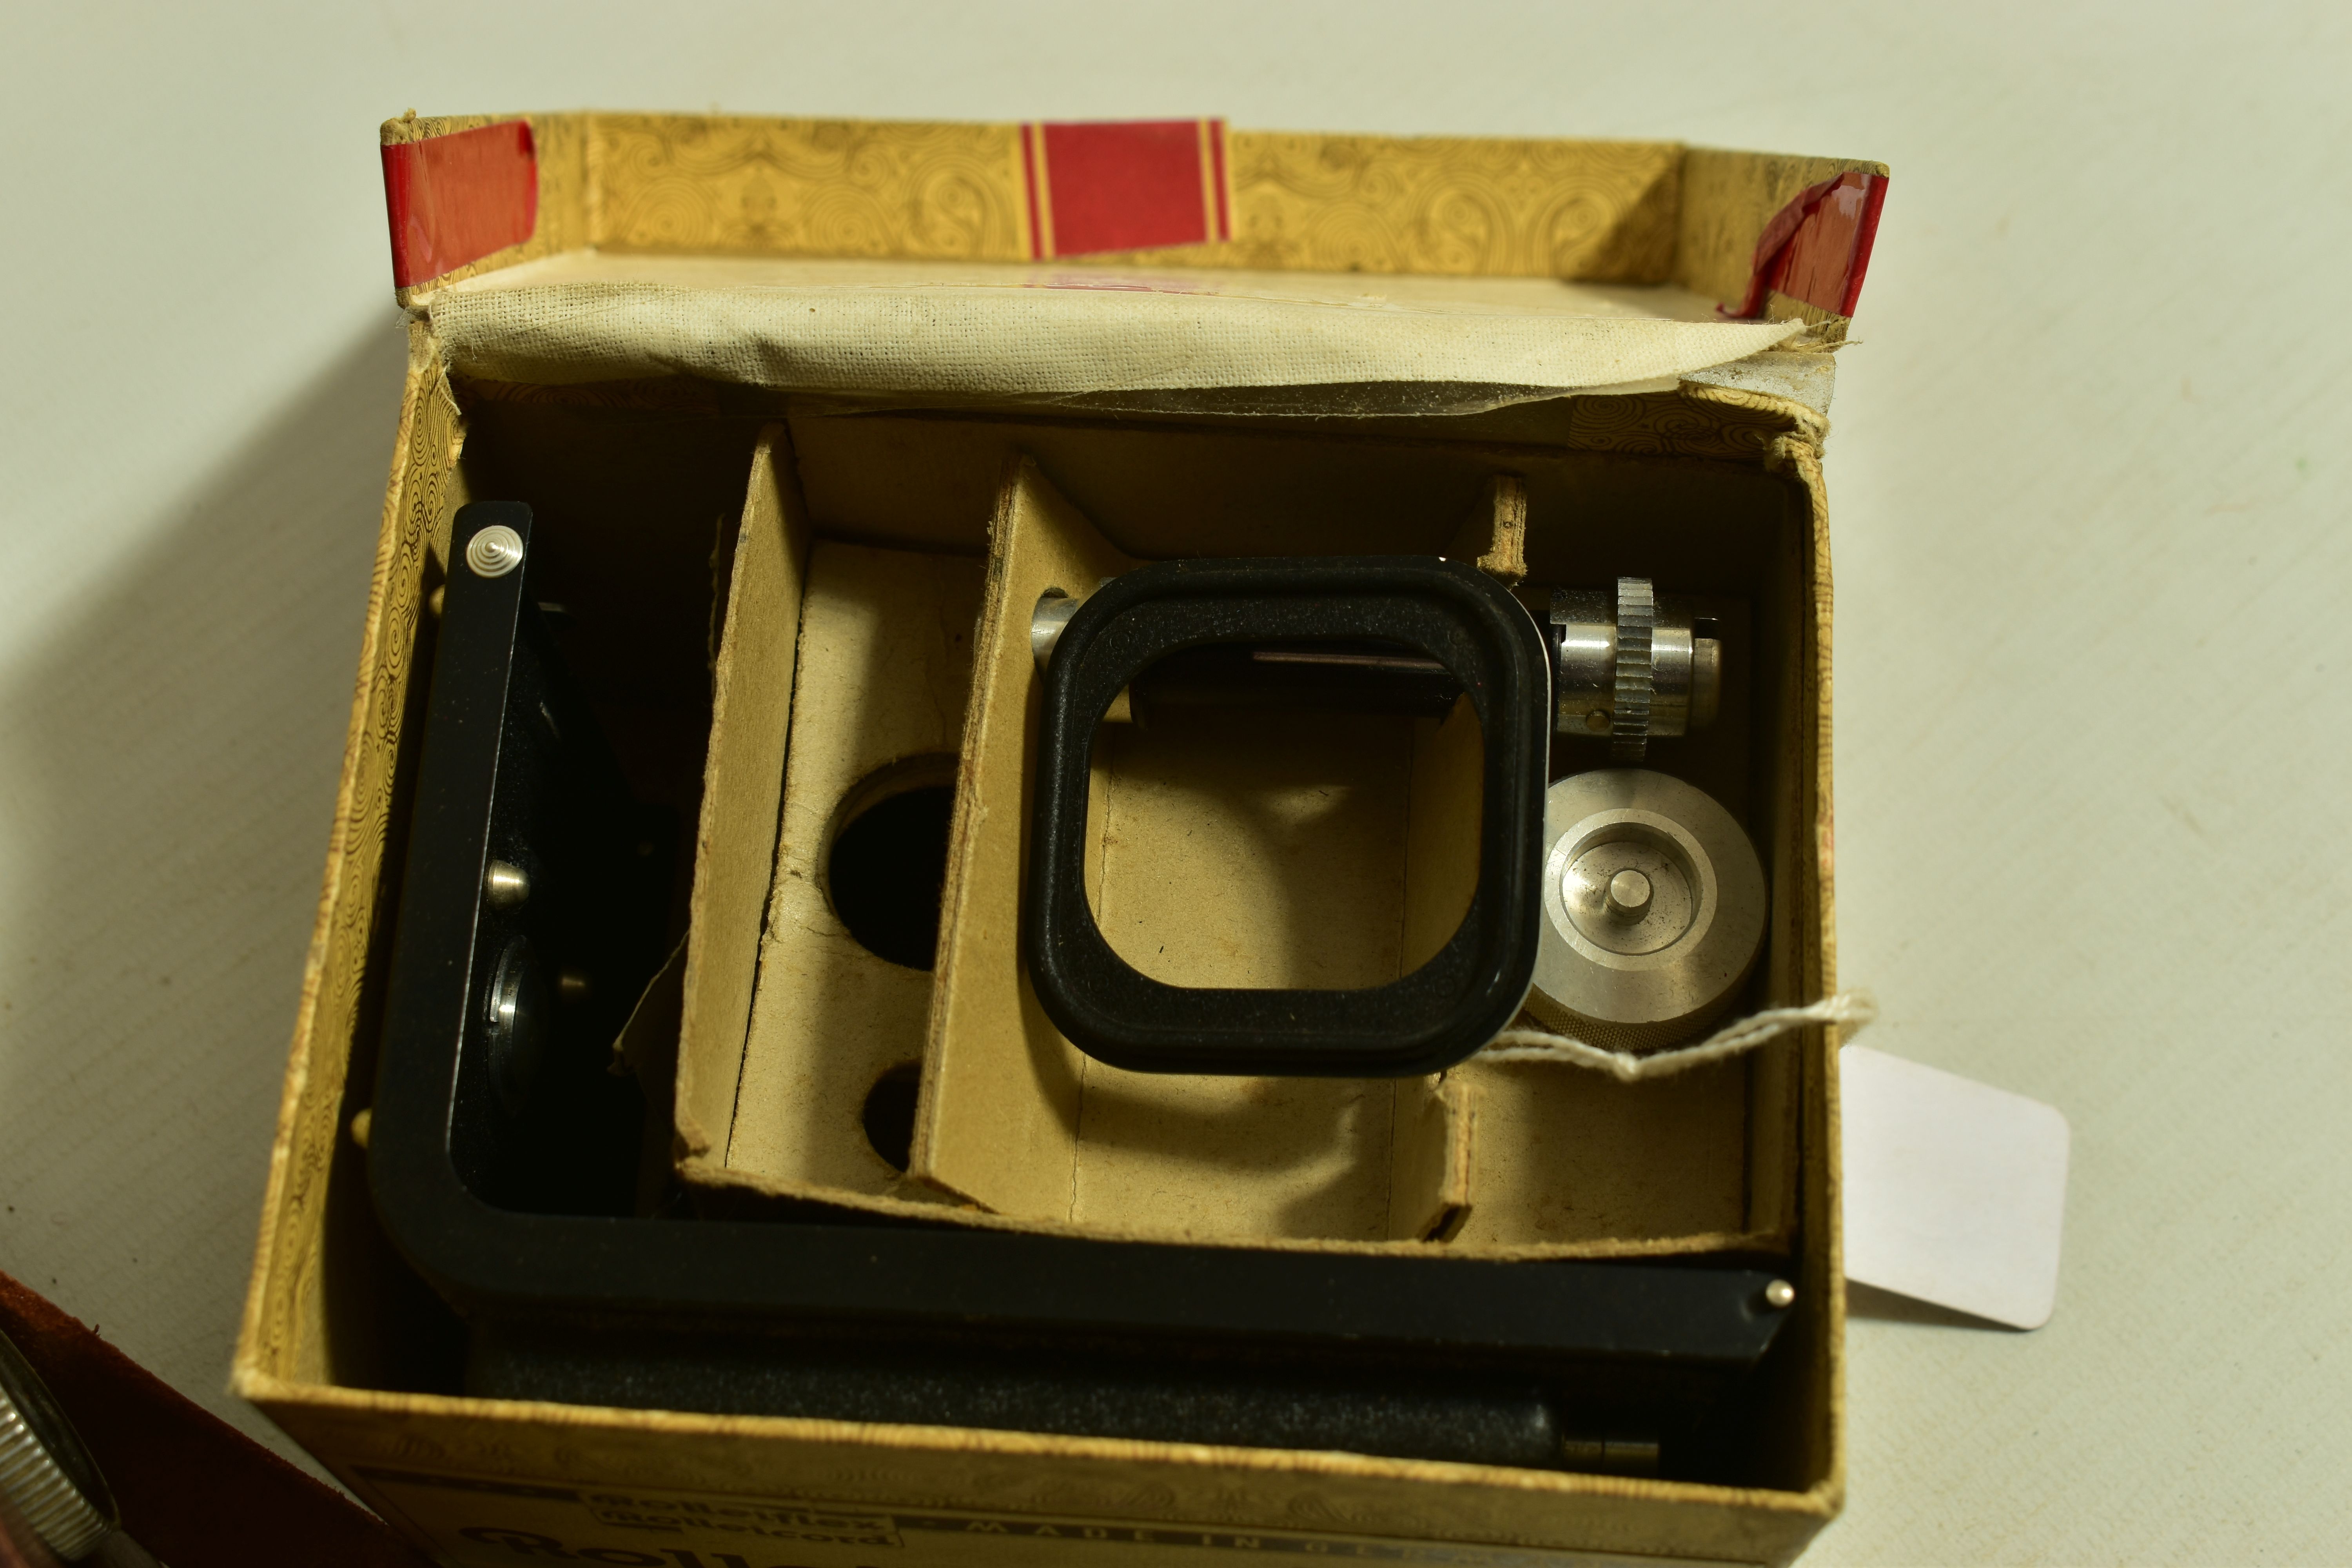 A ROLLEIFLEX AUTOMAT 6X6 K4 50 TLR CAMERA Serial No 1166151 fitted with Tessar 7.5cm f 3.5 with a - Image 3 of 5